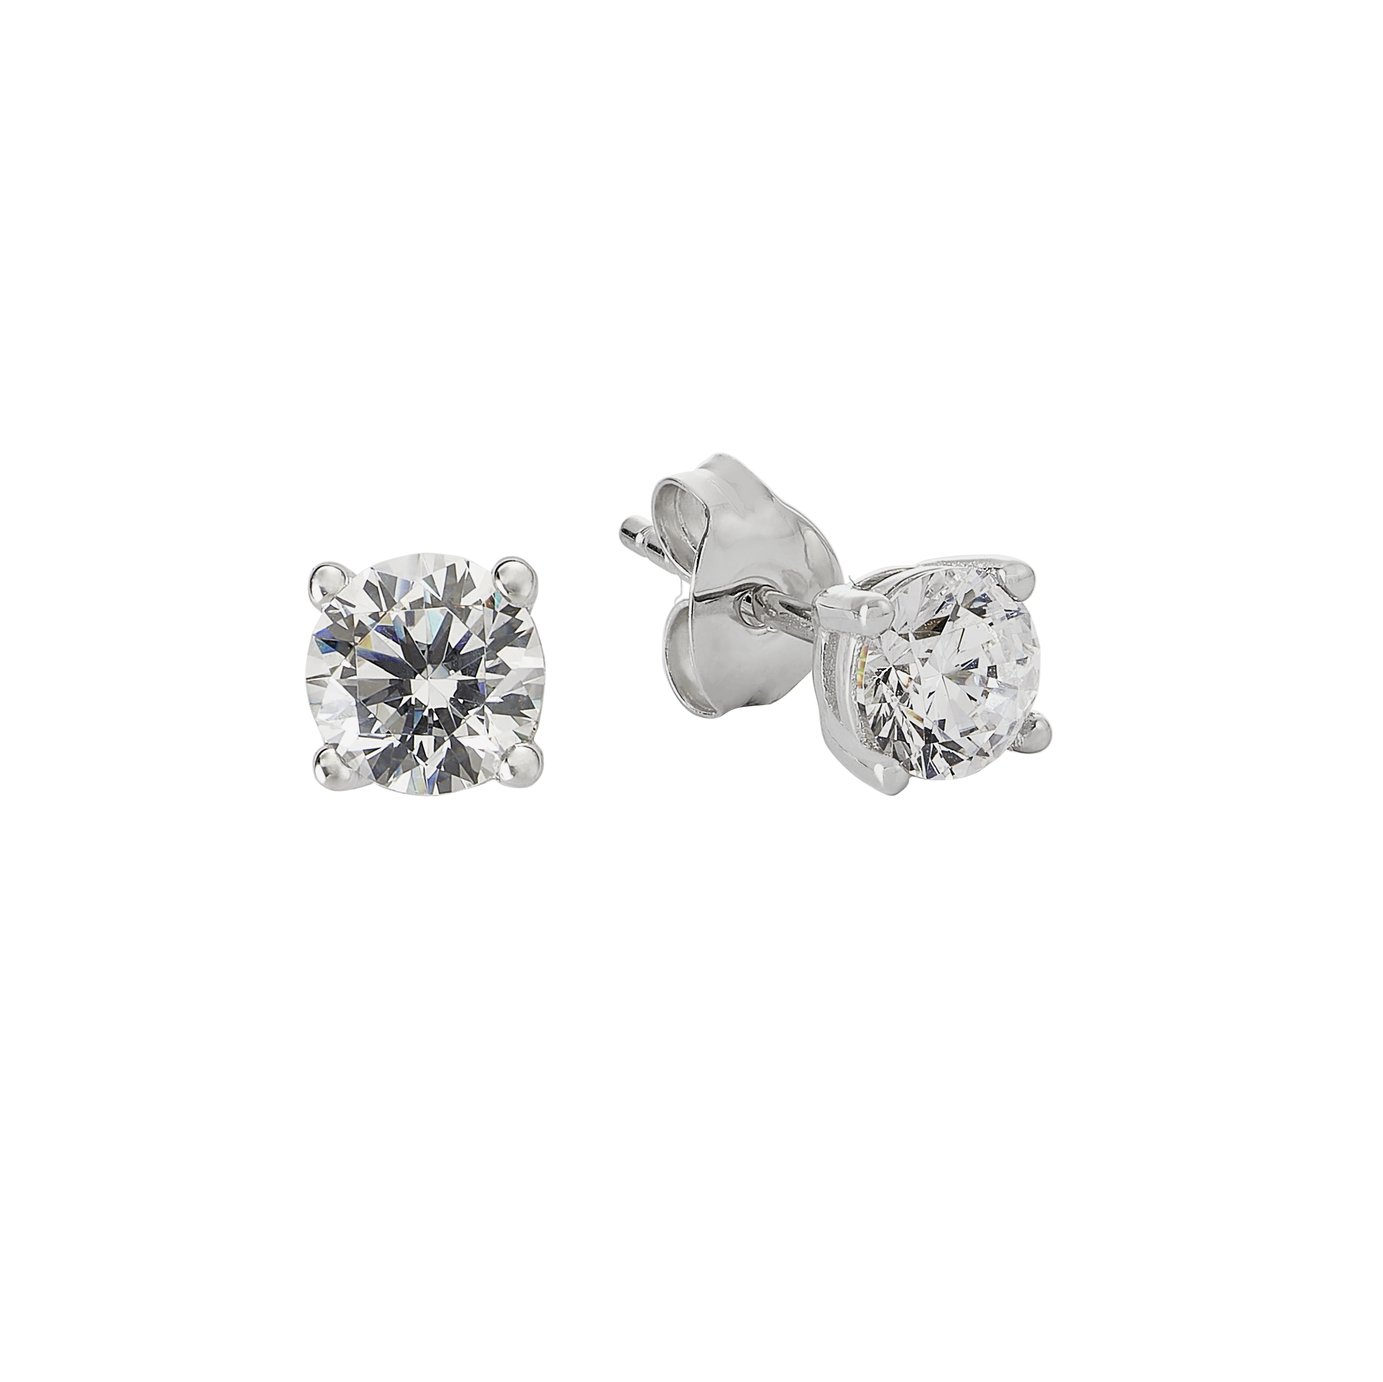 Revere 9ct White Gold Four Claw Cubic Zirconia Stud Earrings